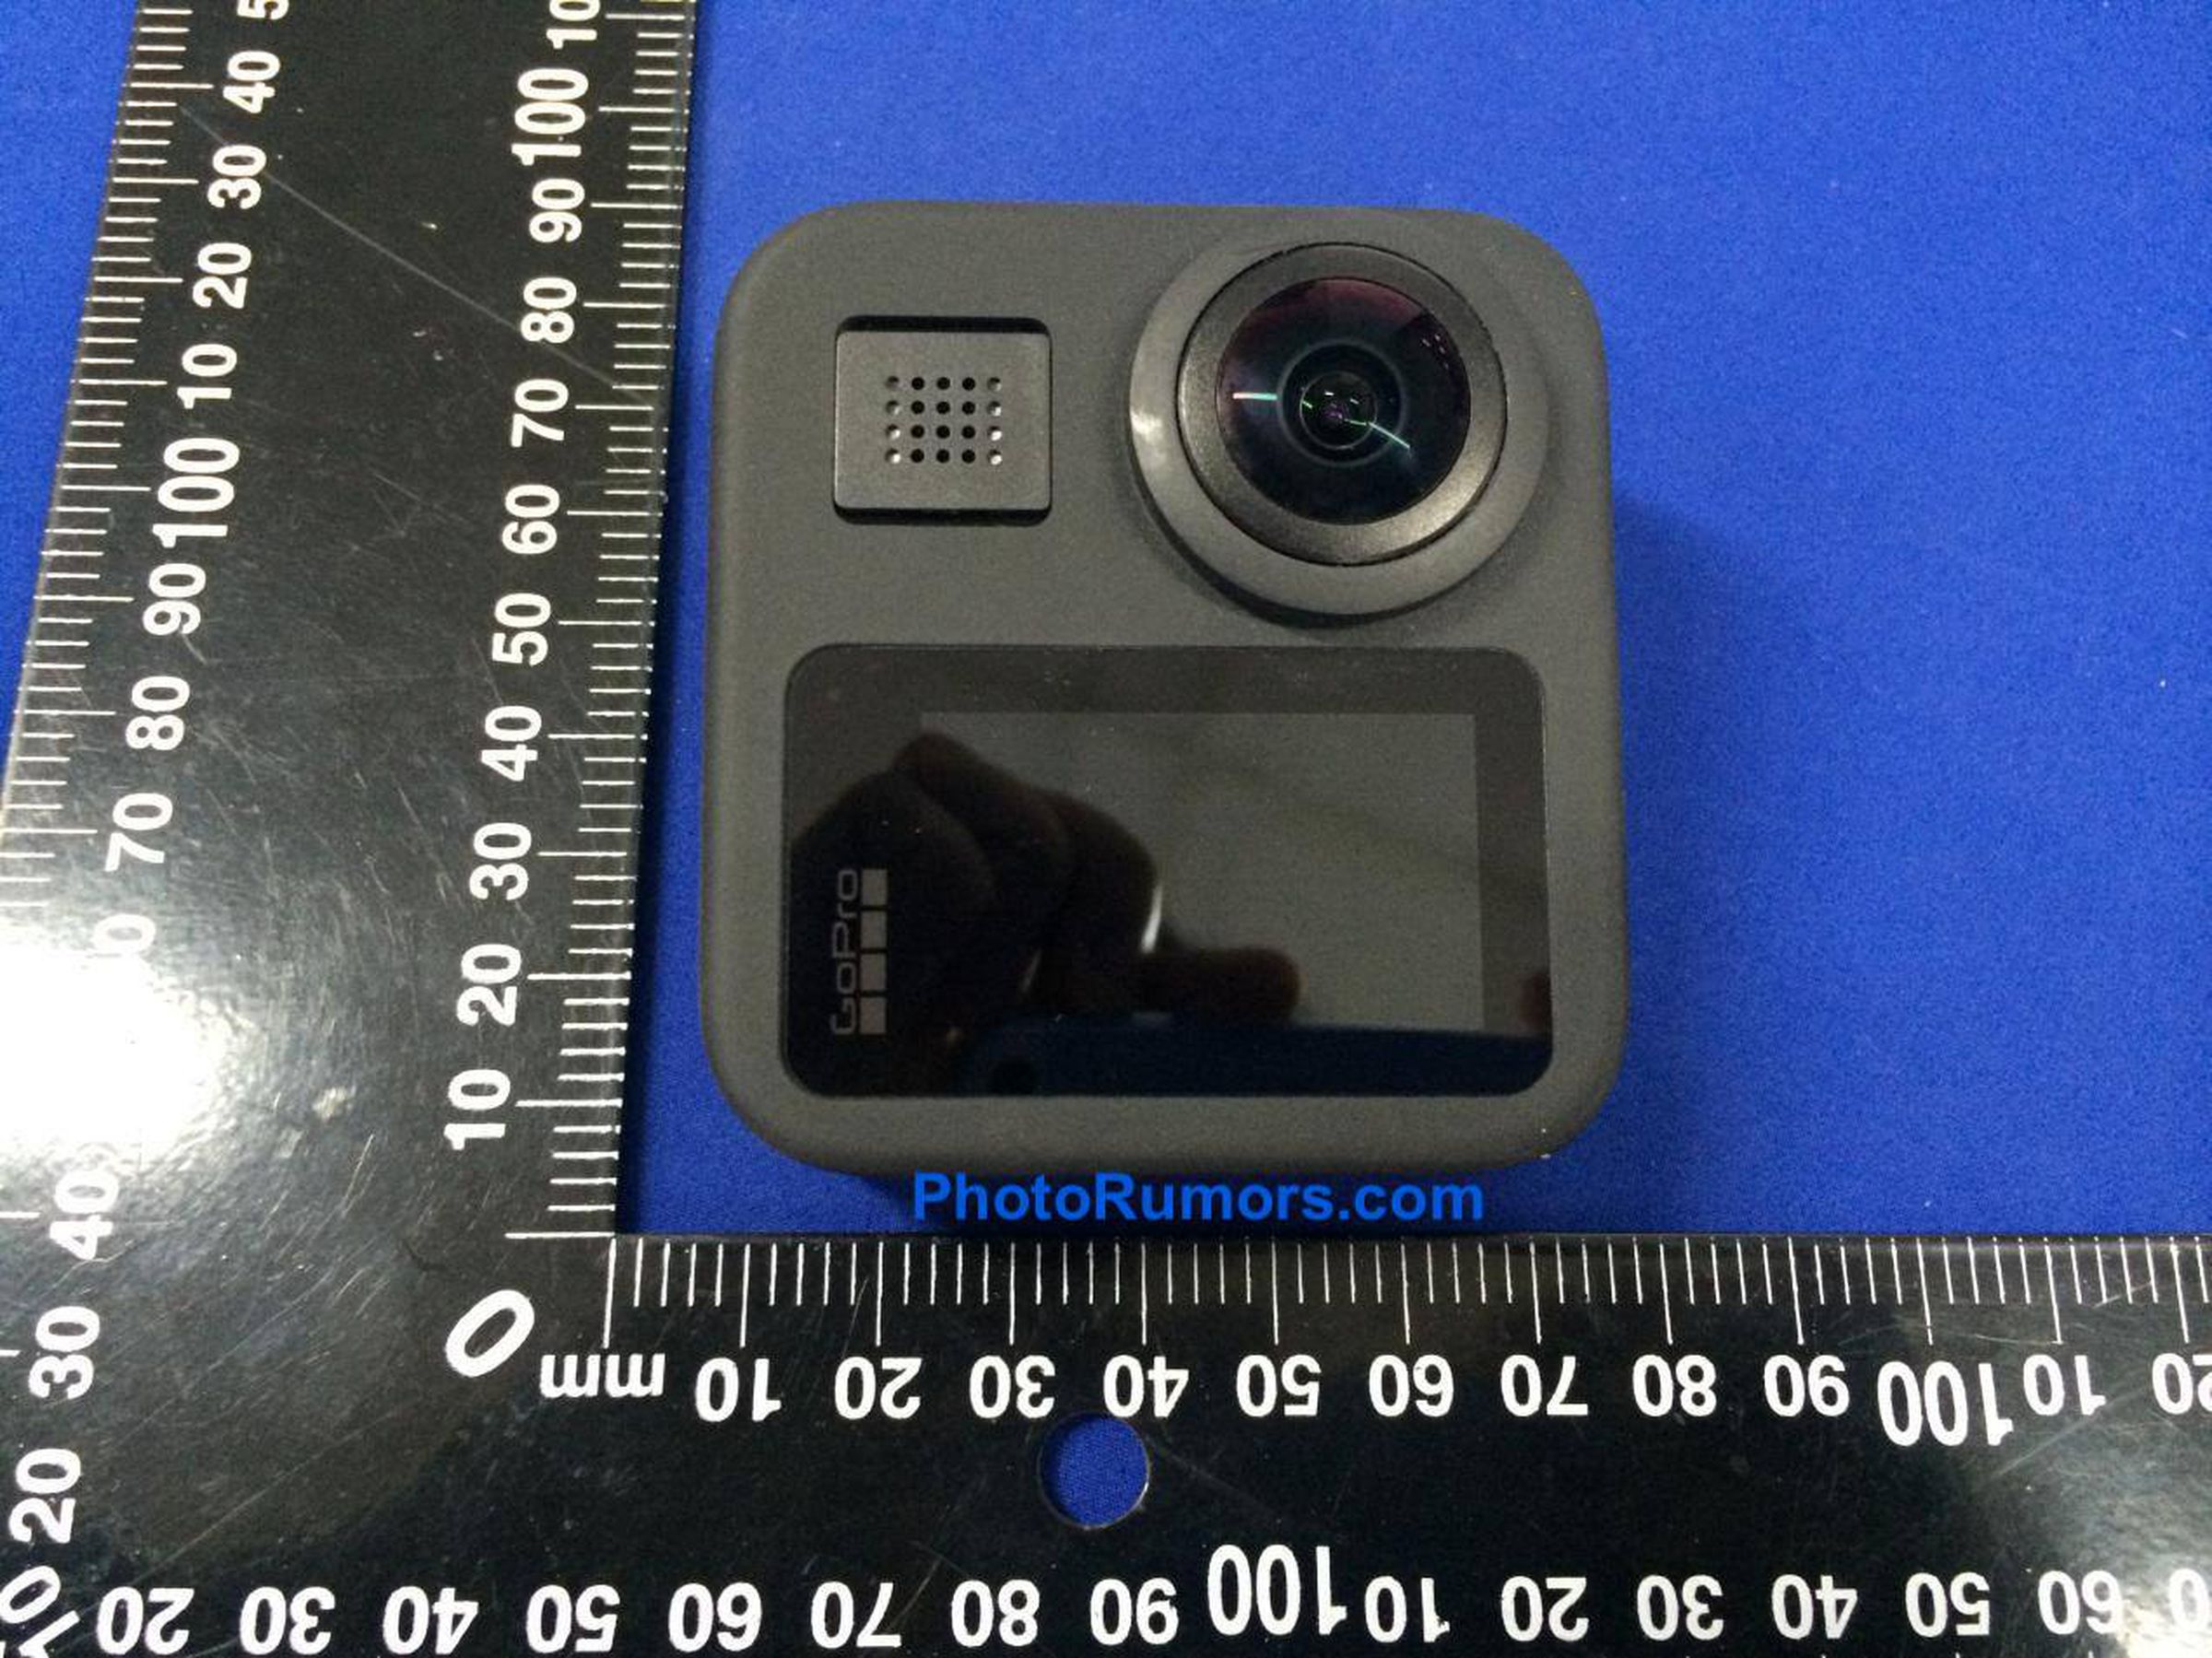 On the back, there appears to be a screen as well as a second camera.